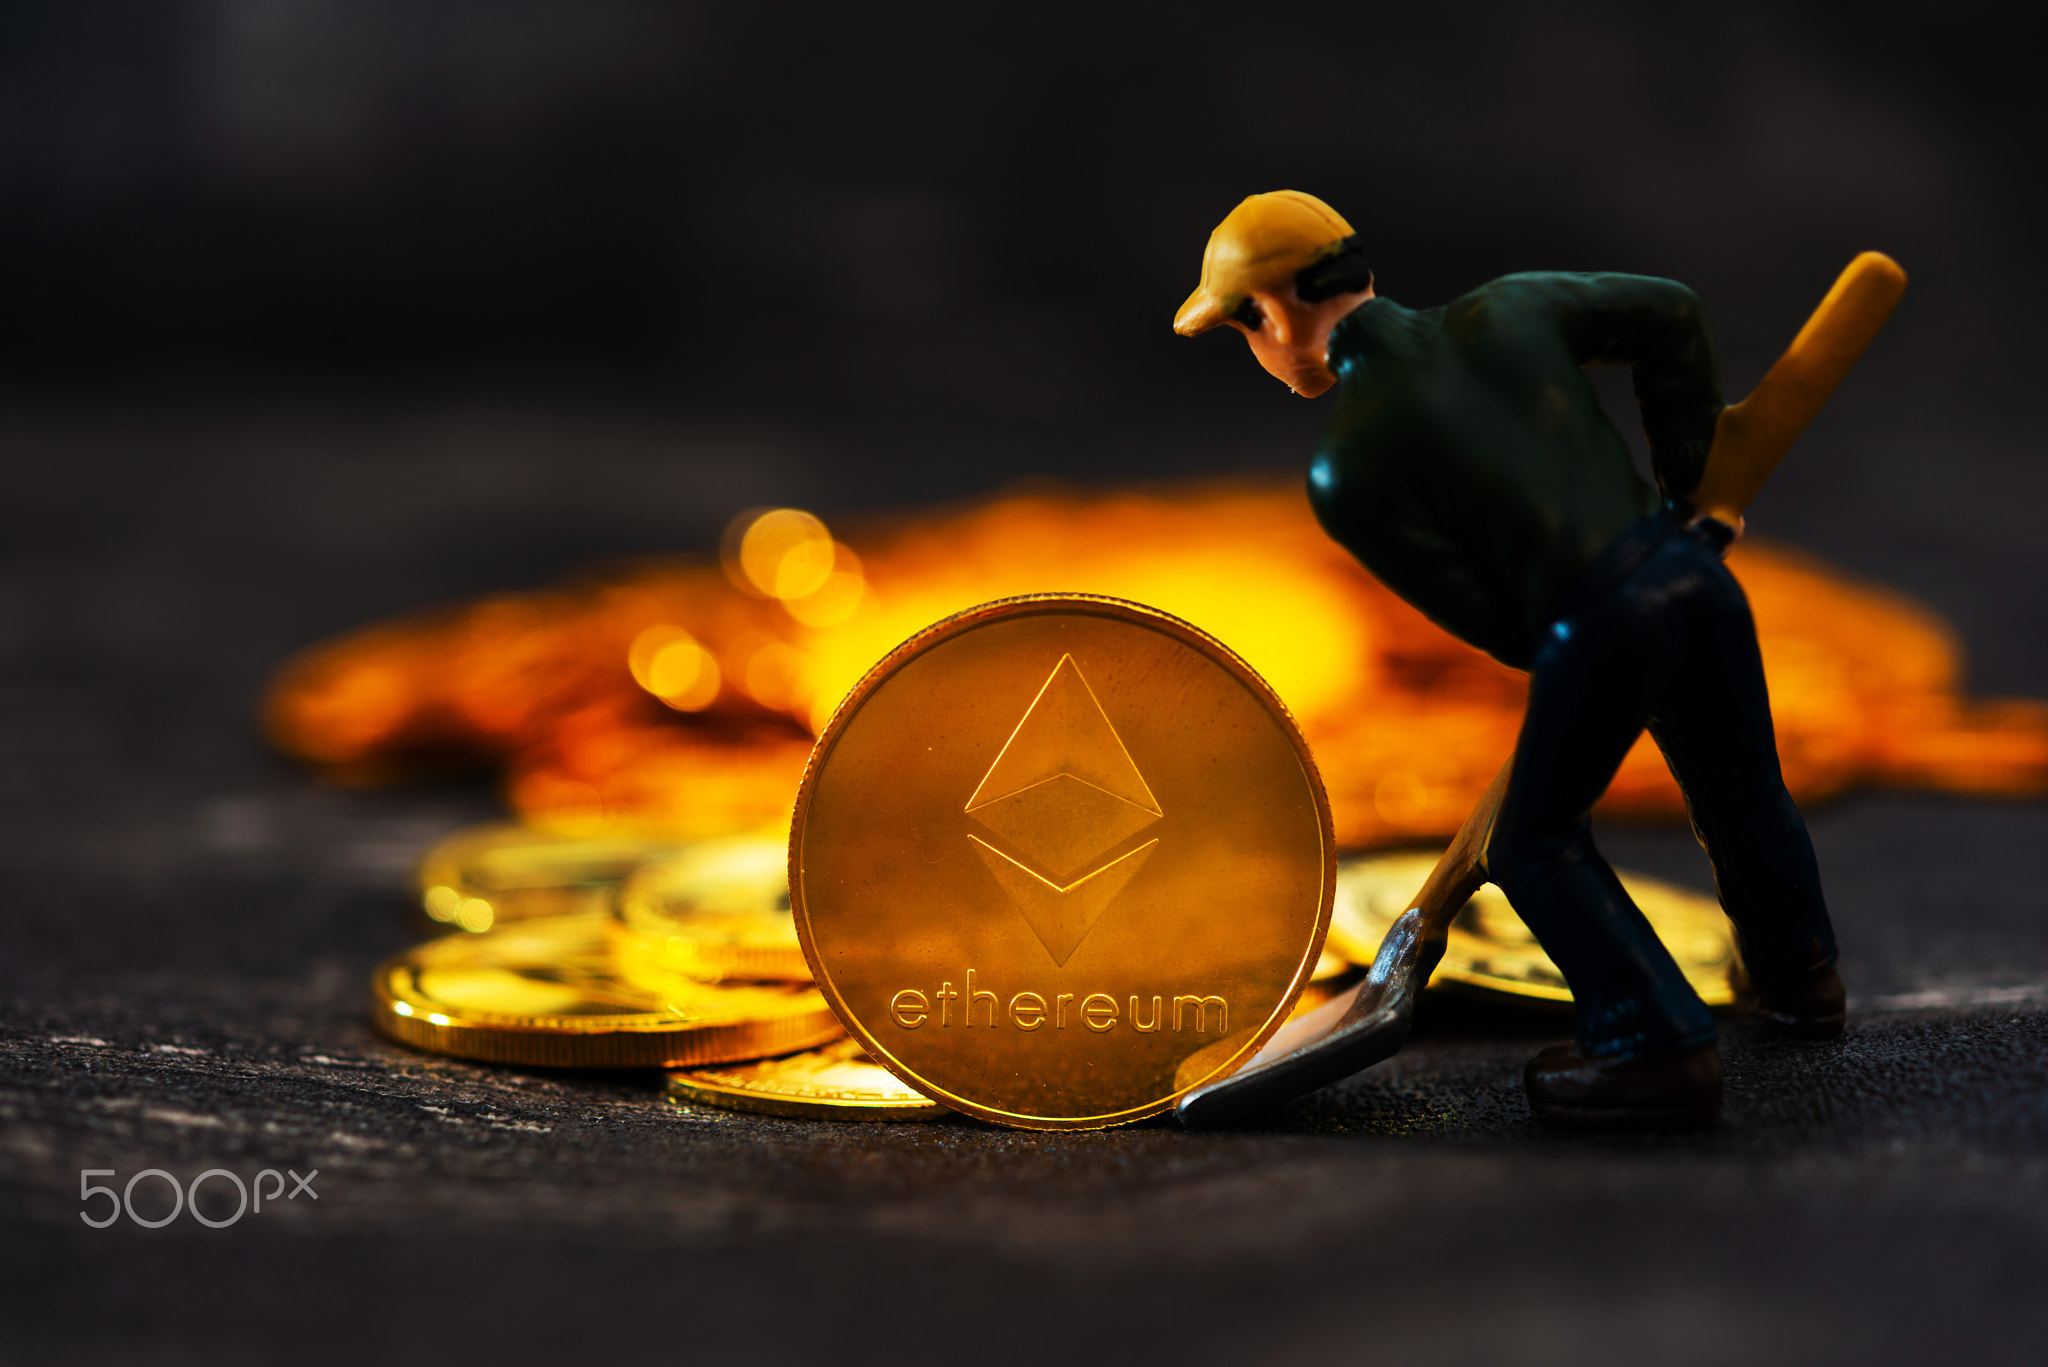 Miners are mining Ethereum Coin digital currency